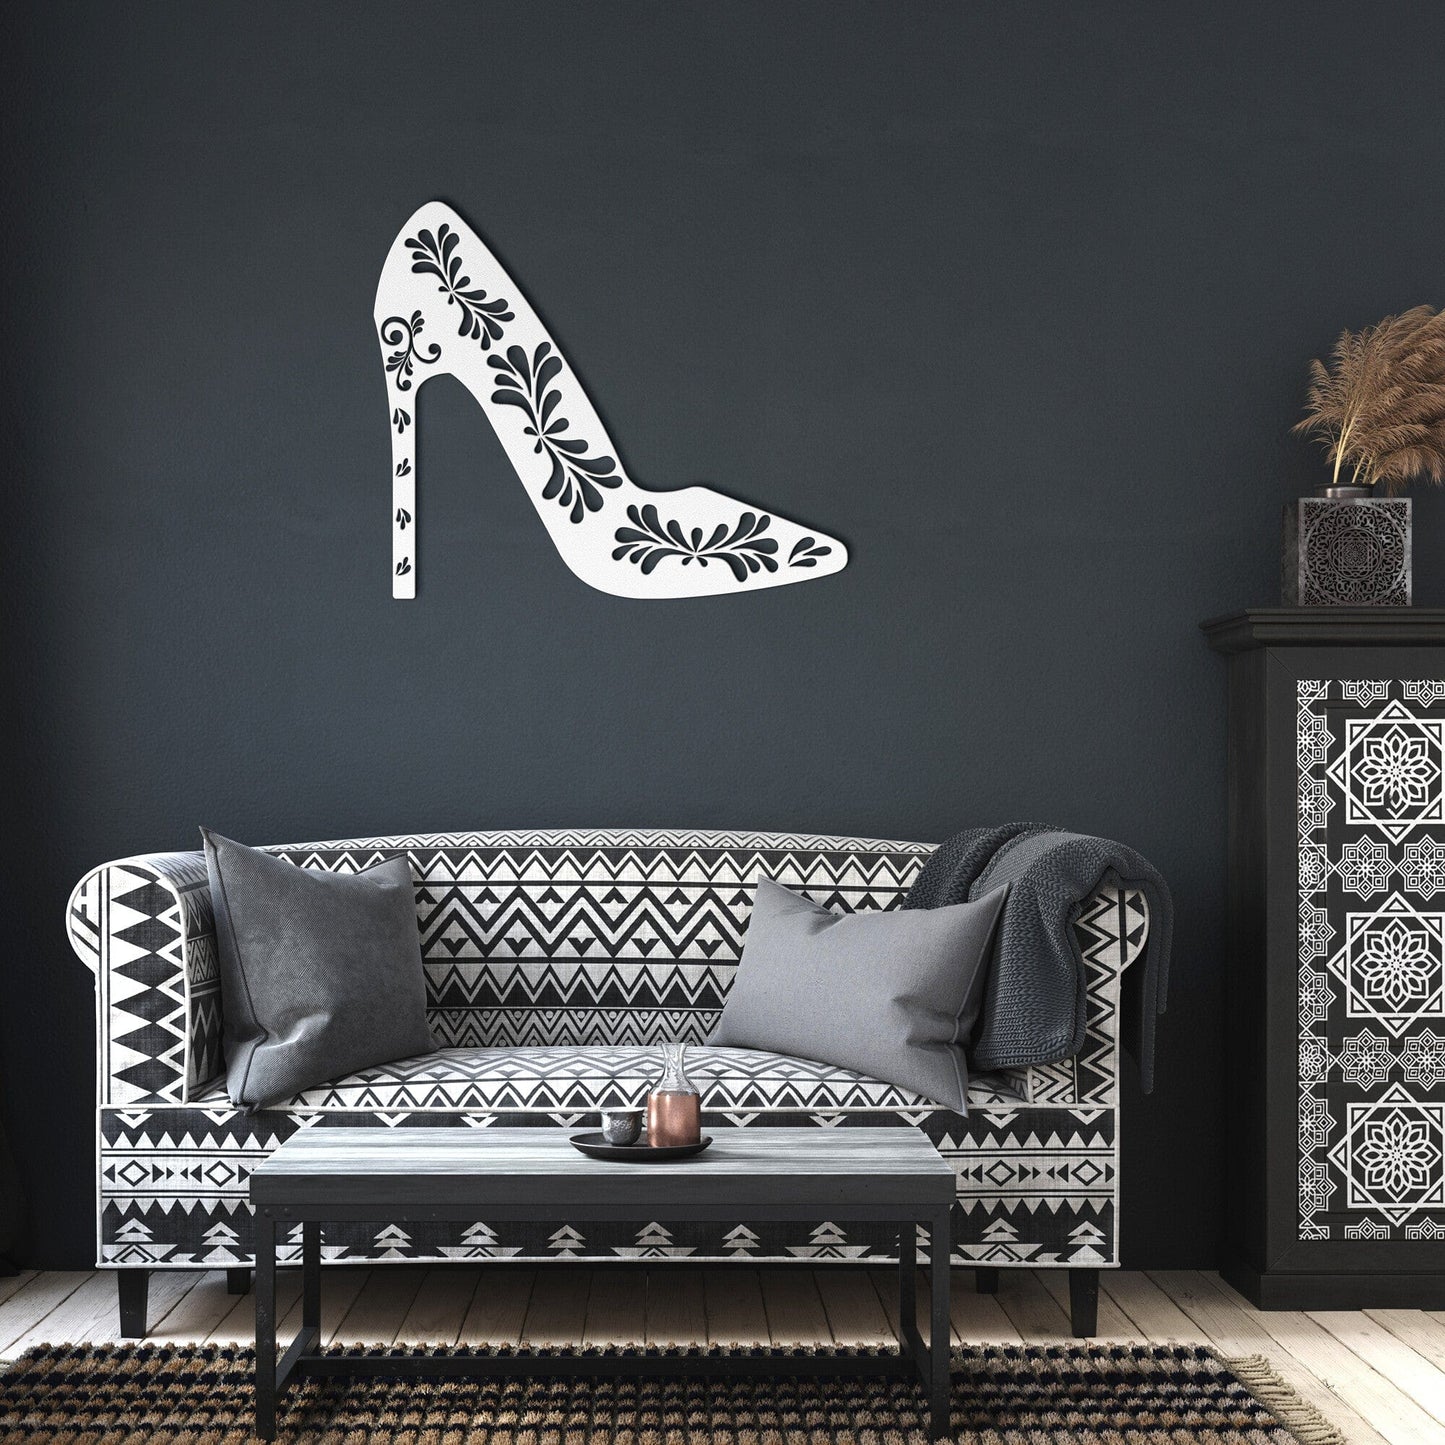 Shoe wall art with vintage pattern